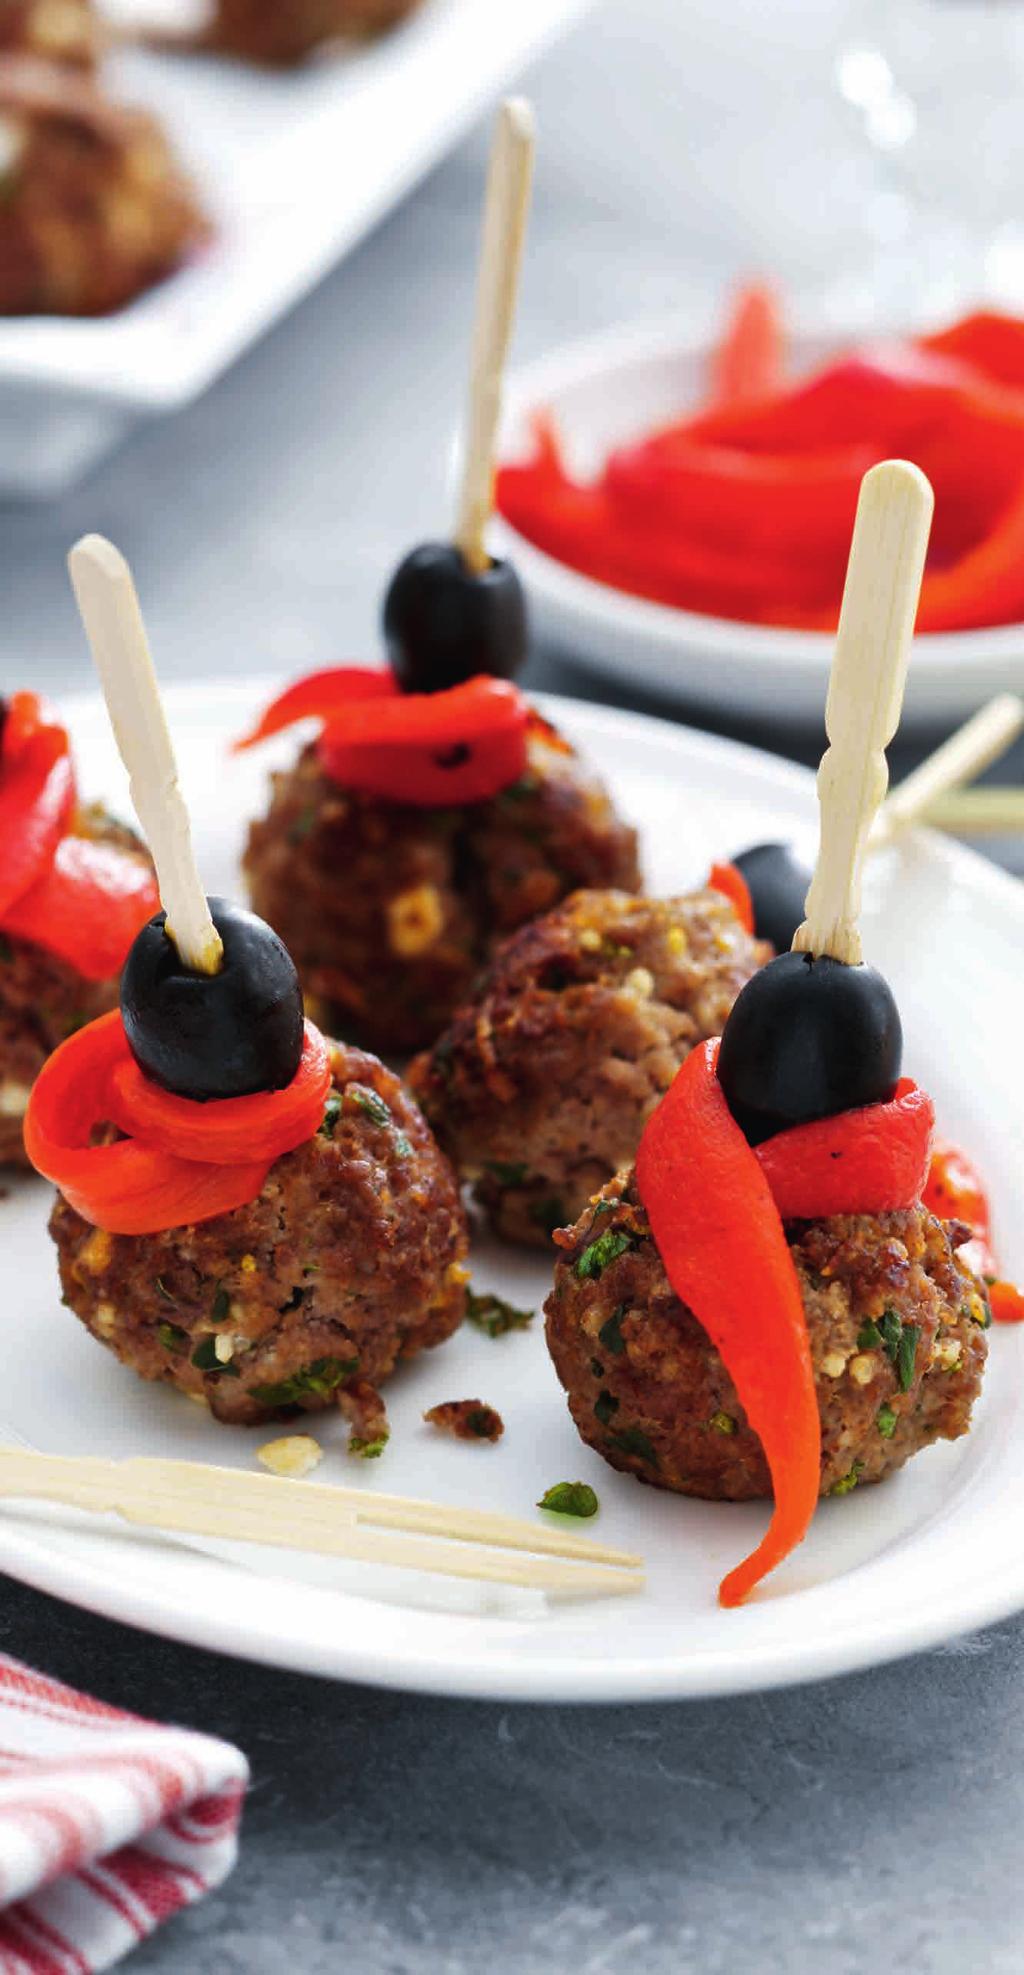 Meatballs with Feta Meat Loaf Appetizer - 10 portions 10 minutes + 8 minutes airfryer 150 g lamb mince or lean minced beef 1 slice of stale white bread, turned into fine crumbs 50 g Greek feta,